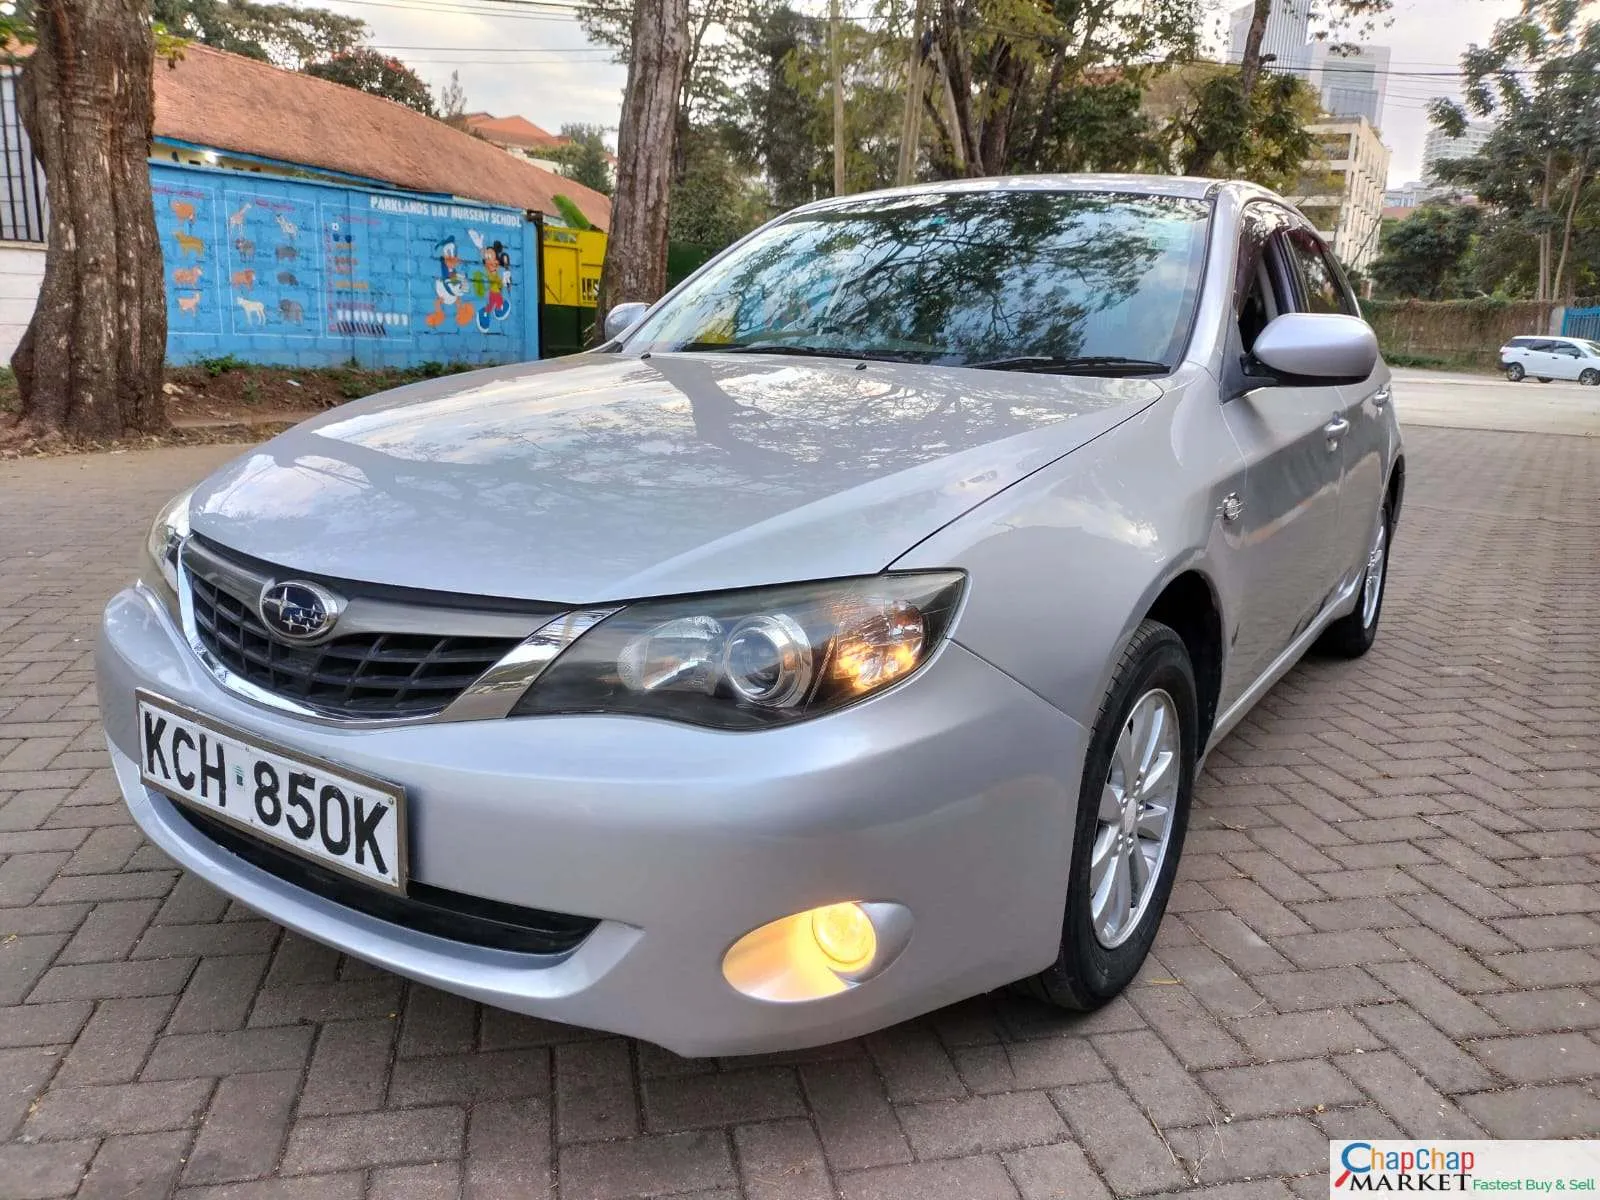 Cars Cars For Sale/Vehicles-Subaru Impreza for Sale in Kenya You Pay 30% deposit Trade in Ok EXCLUSIVE 9